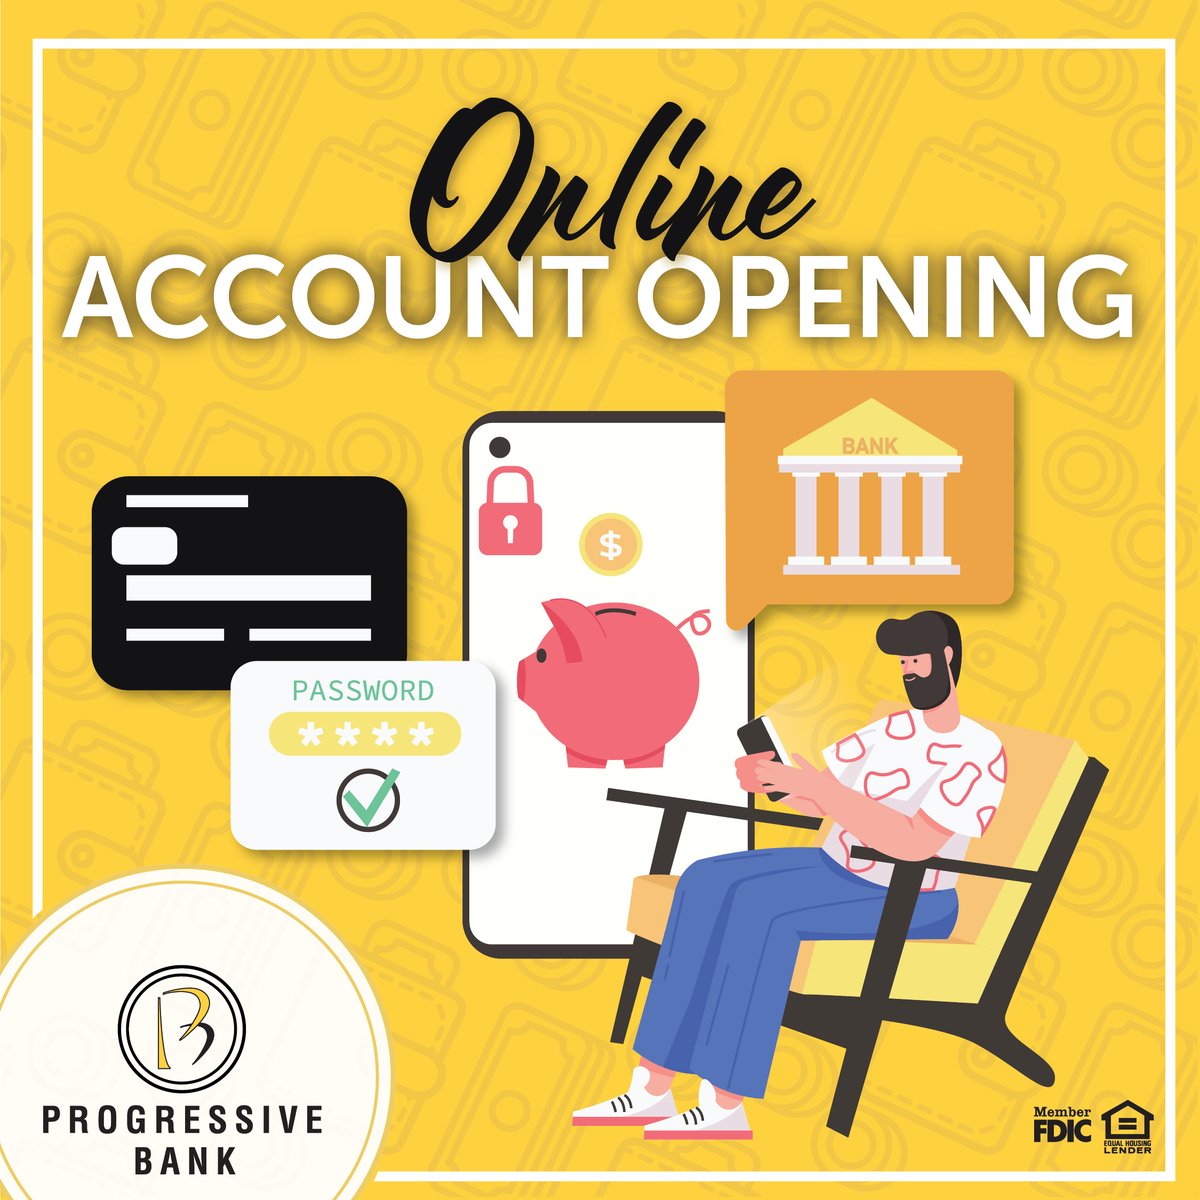 Open a personal checking or savings account in just 5-7 minutes online with Progressive Bank! It’s quick, easy, and convenient.

Learn more: bit.ly/2XByIoT

#ProgressiveBank #LocalBank #OnlineBanking